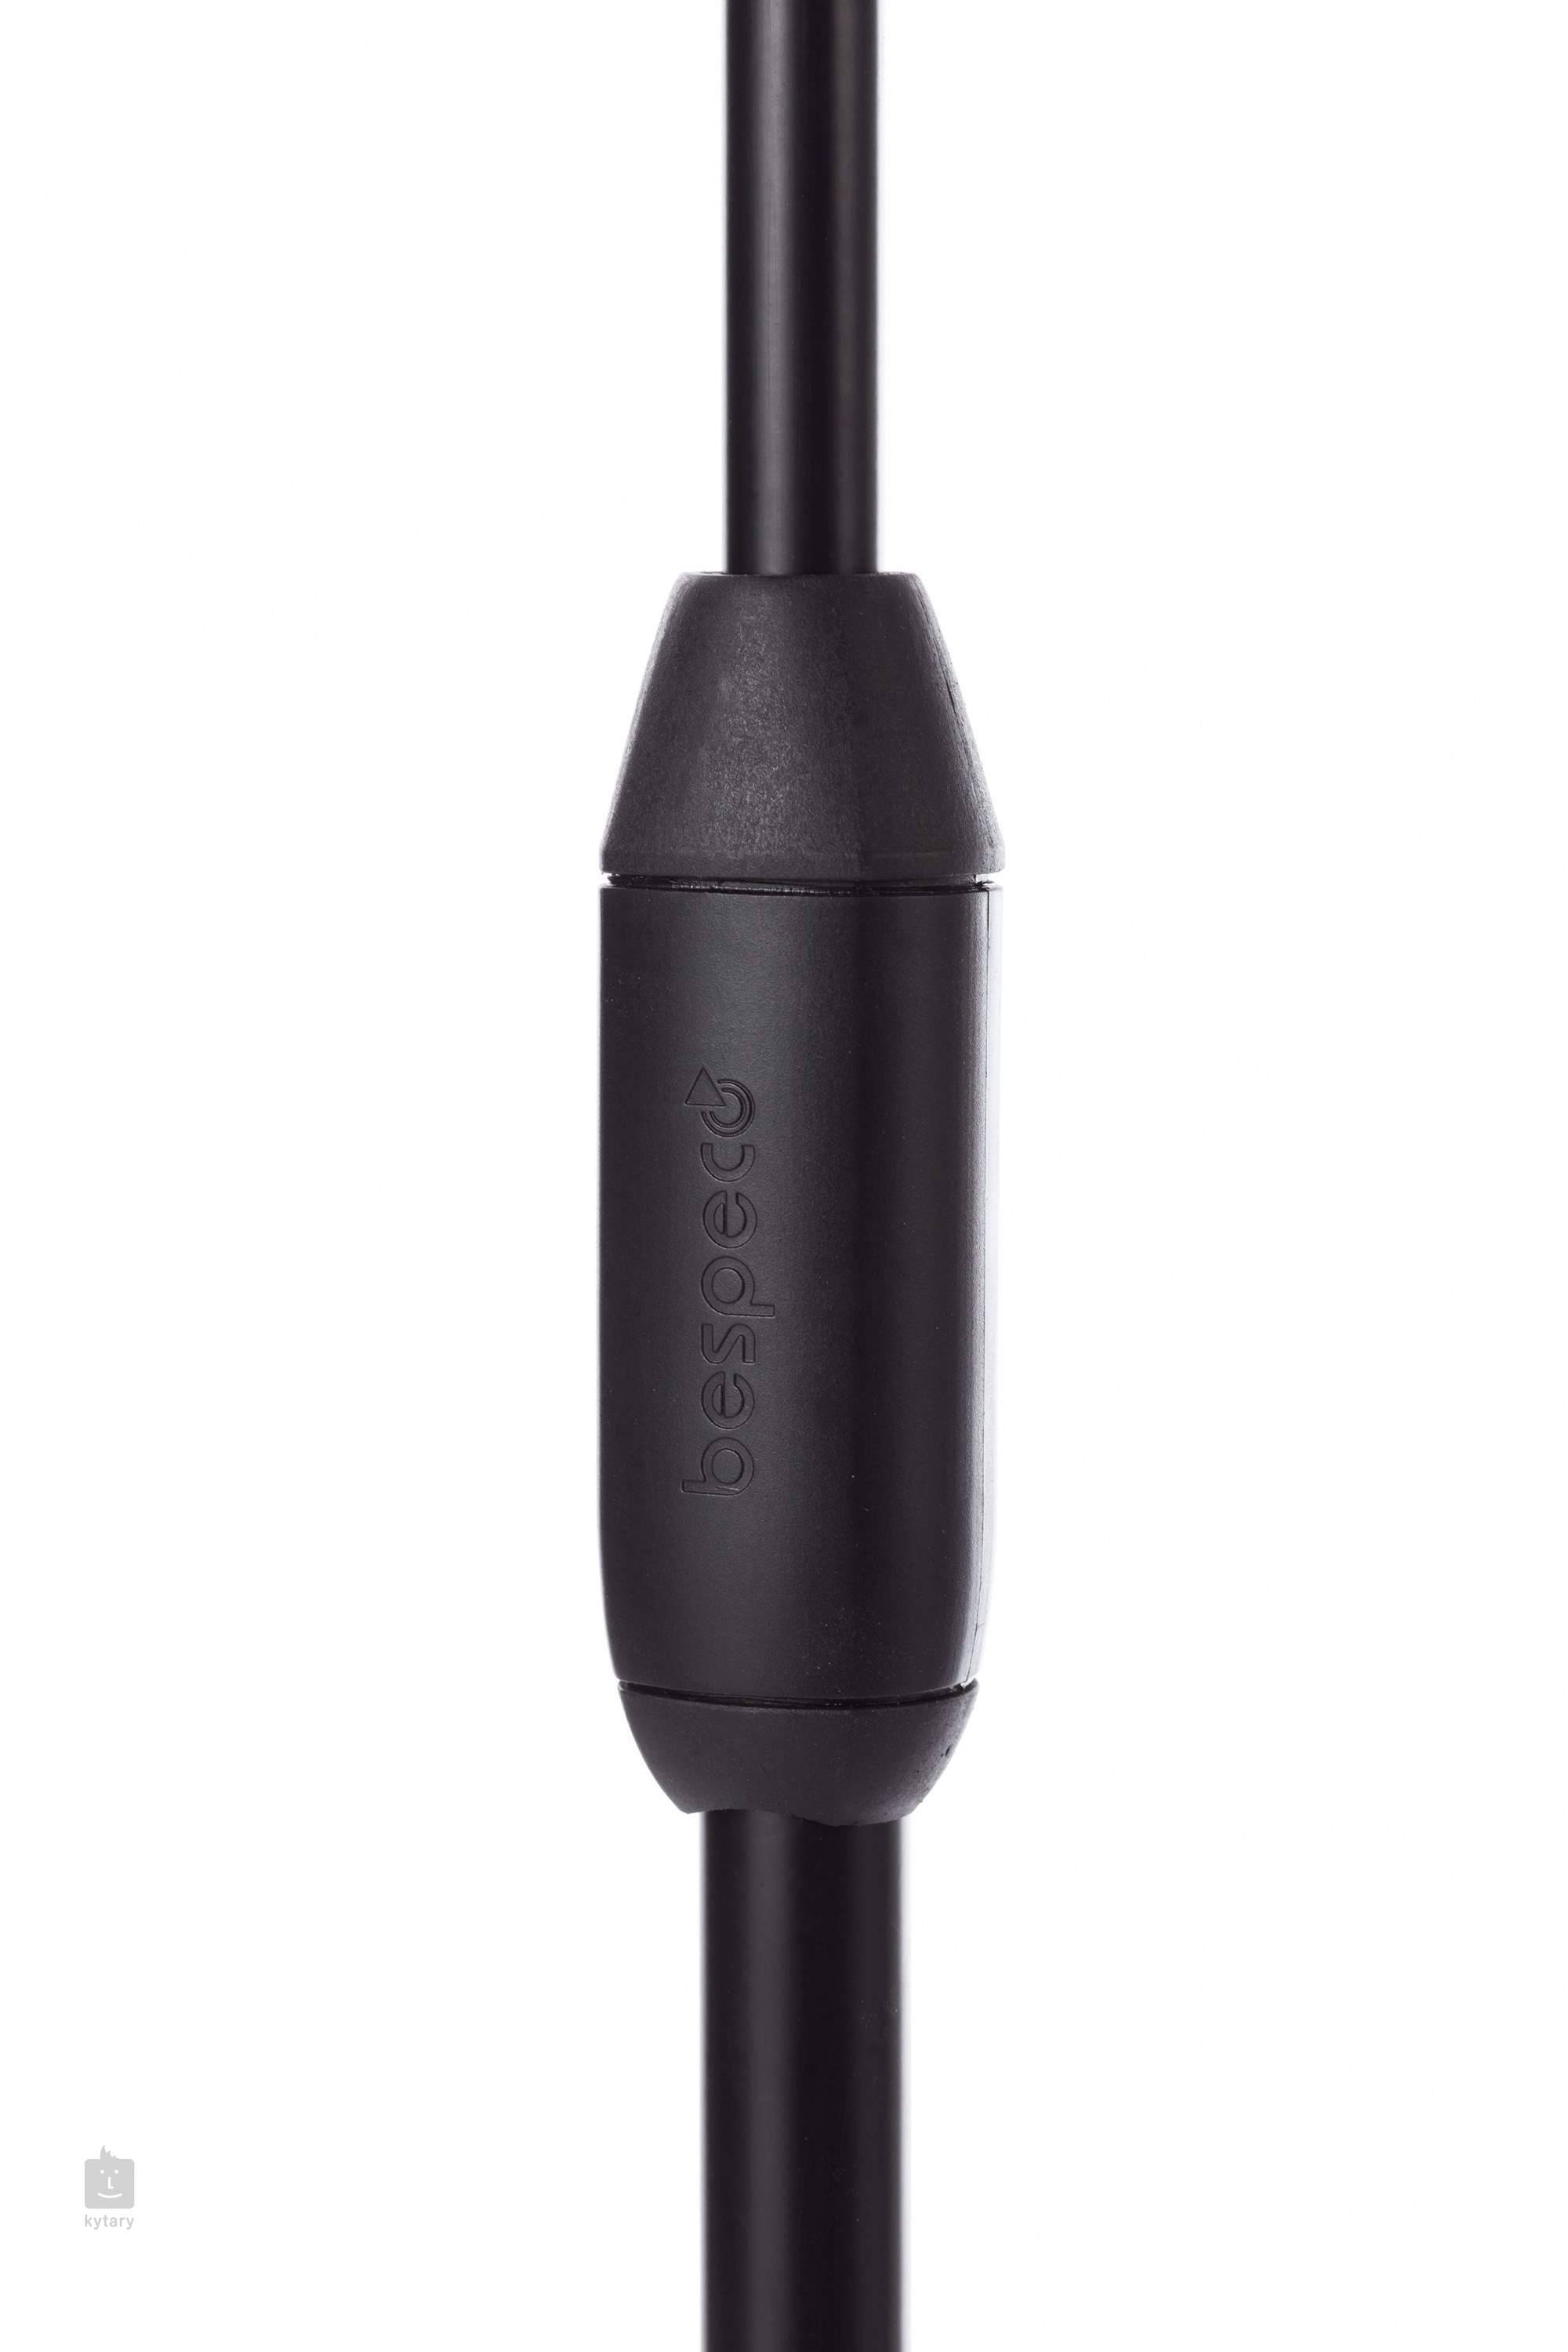 Bespeco Ms 11 Microphone Stand